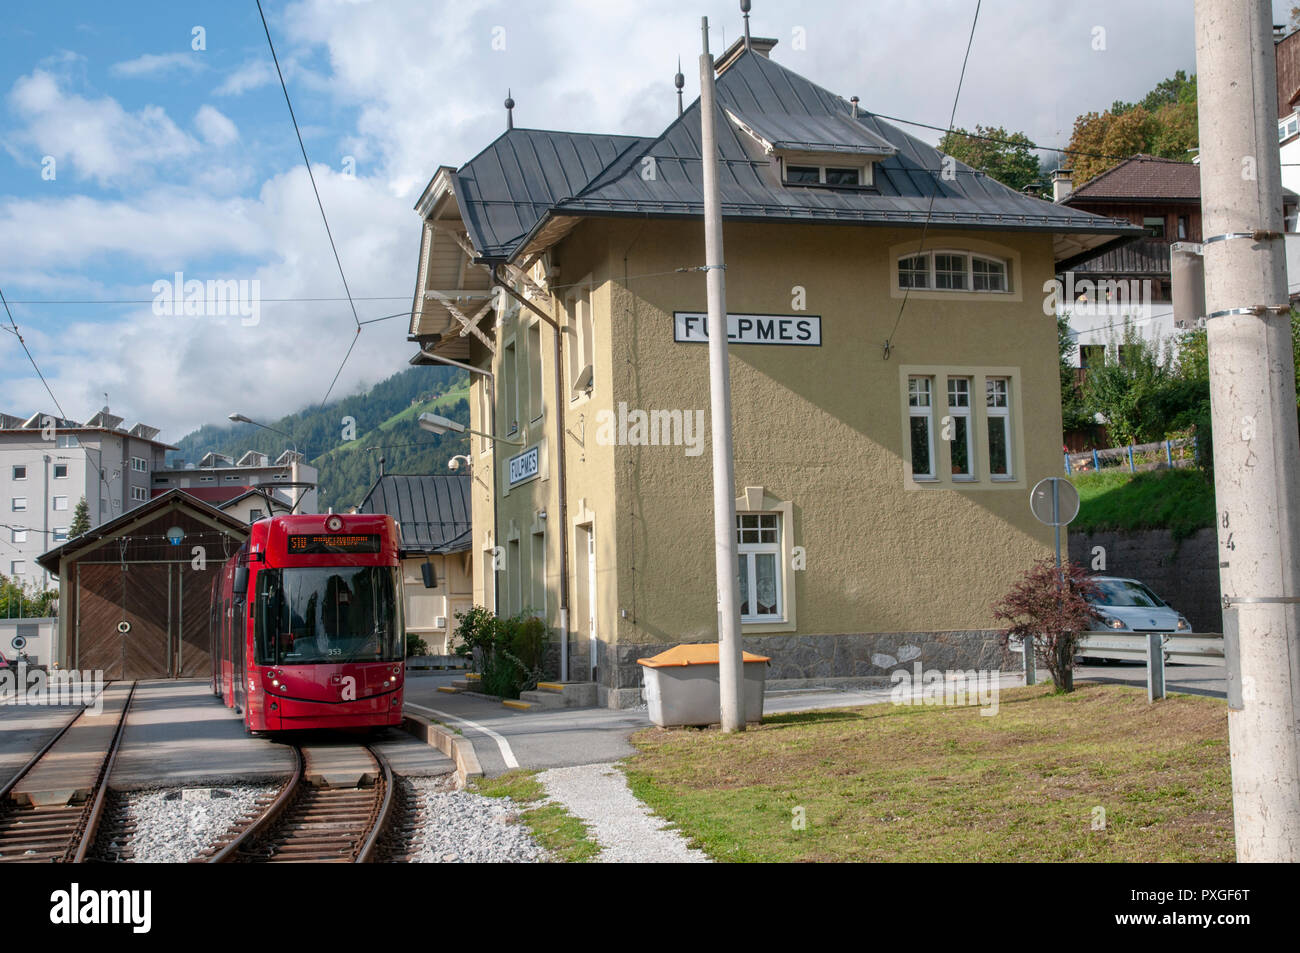 The tram station at Fulpmes, a village and a municipality in Stubaital, Tyrol, Austria. Stock Photo